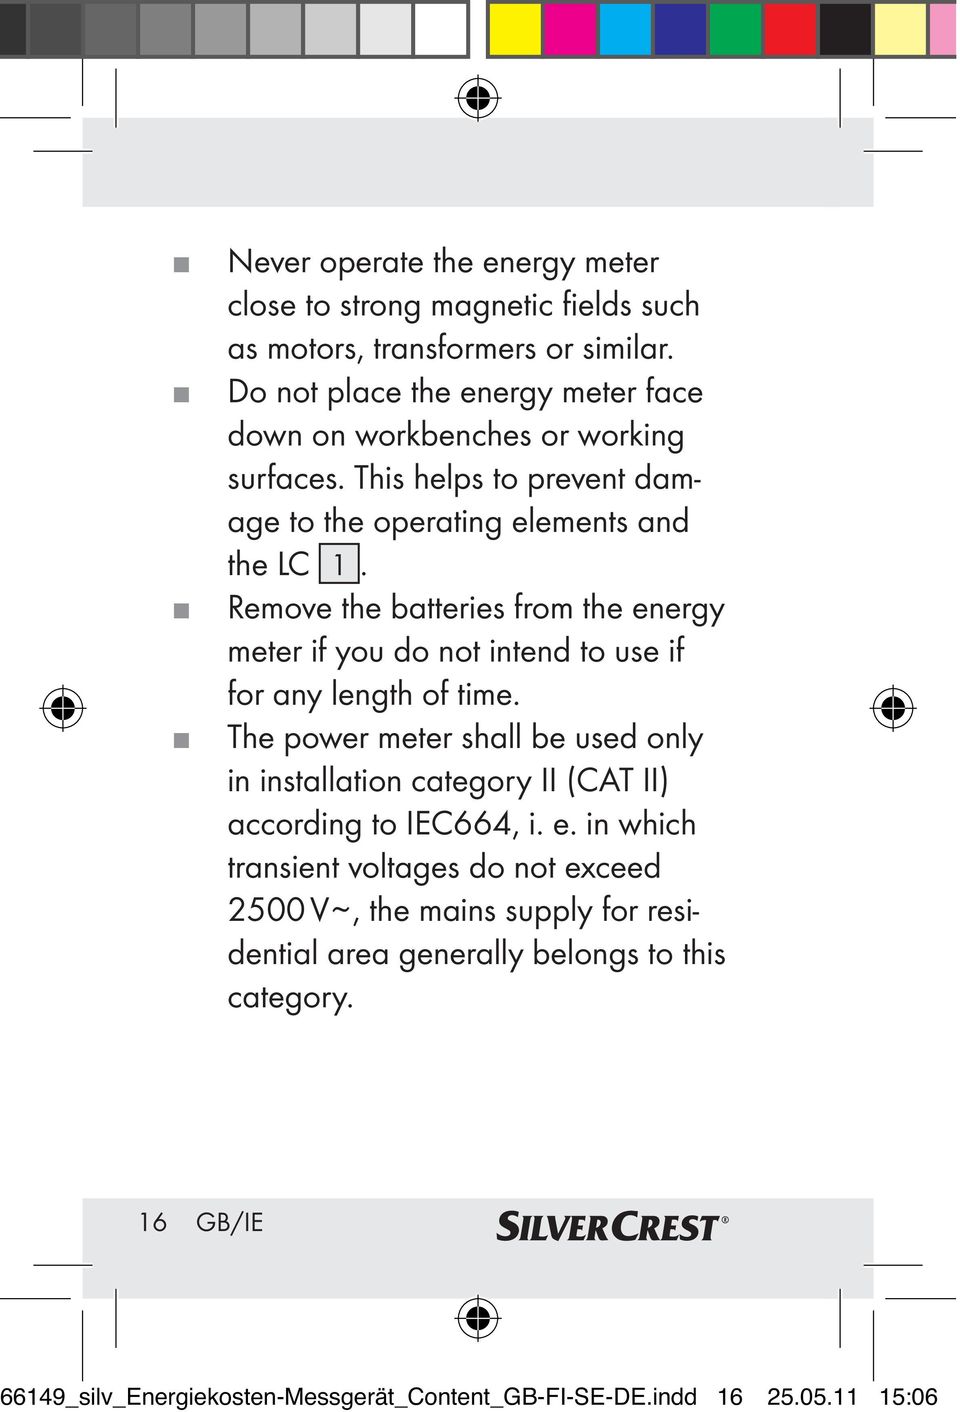 Remove the batteries from the energy meter if you do not intend to use if for any length of time.